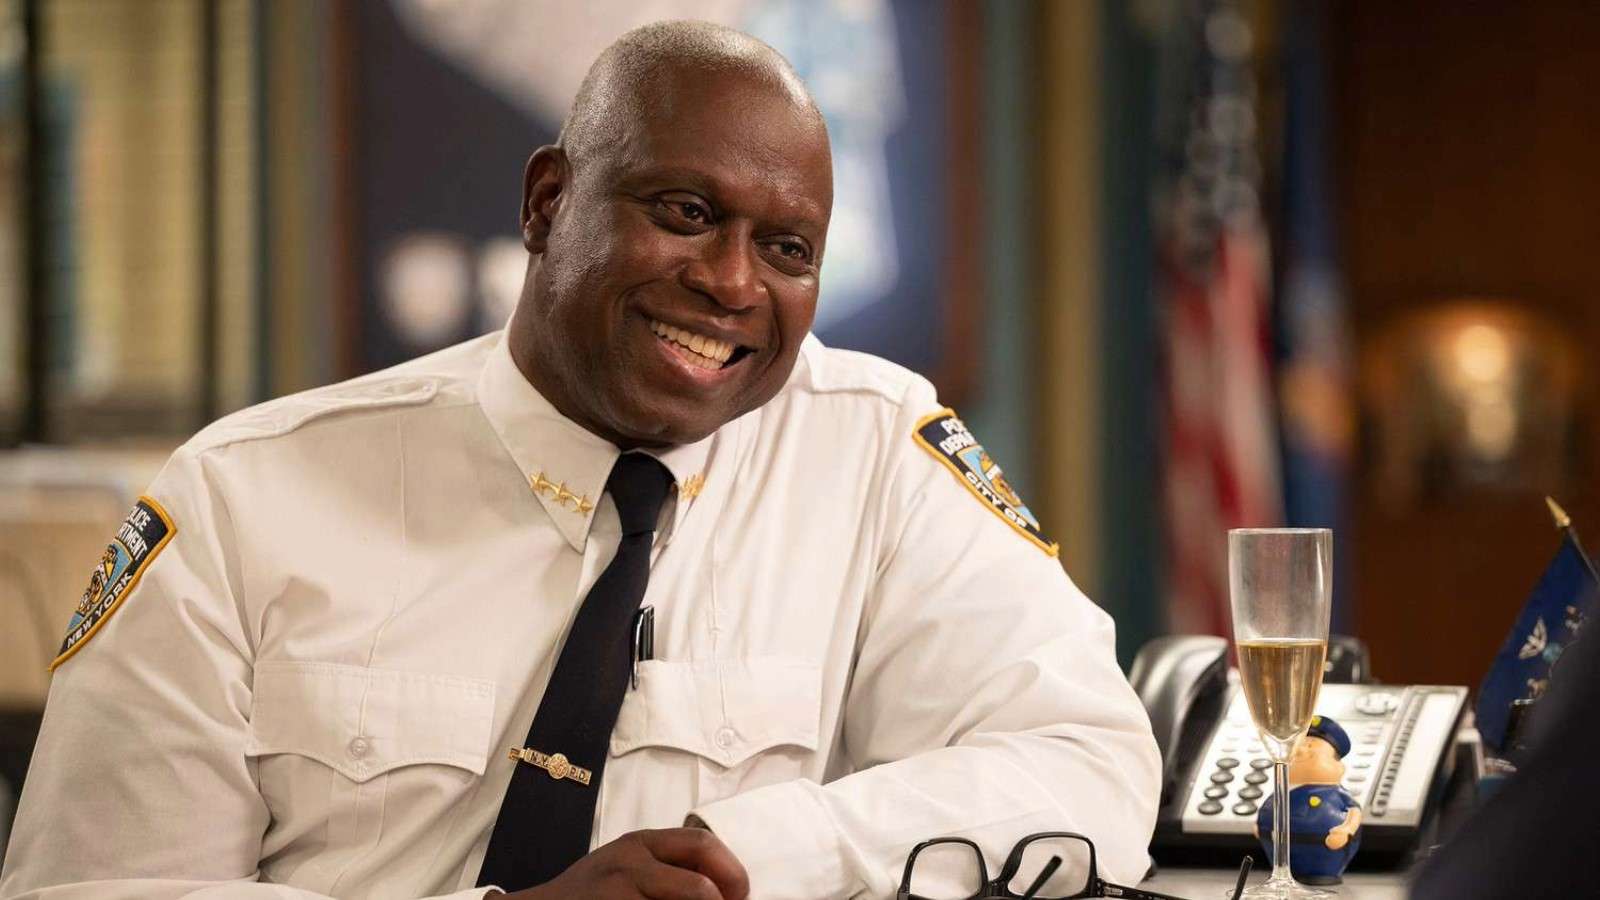 Andre Braugher as Captain Holt in Brooklyn Nine-Nine, smiling